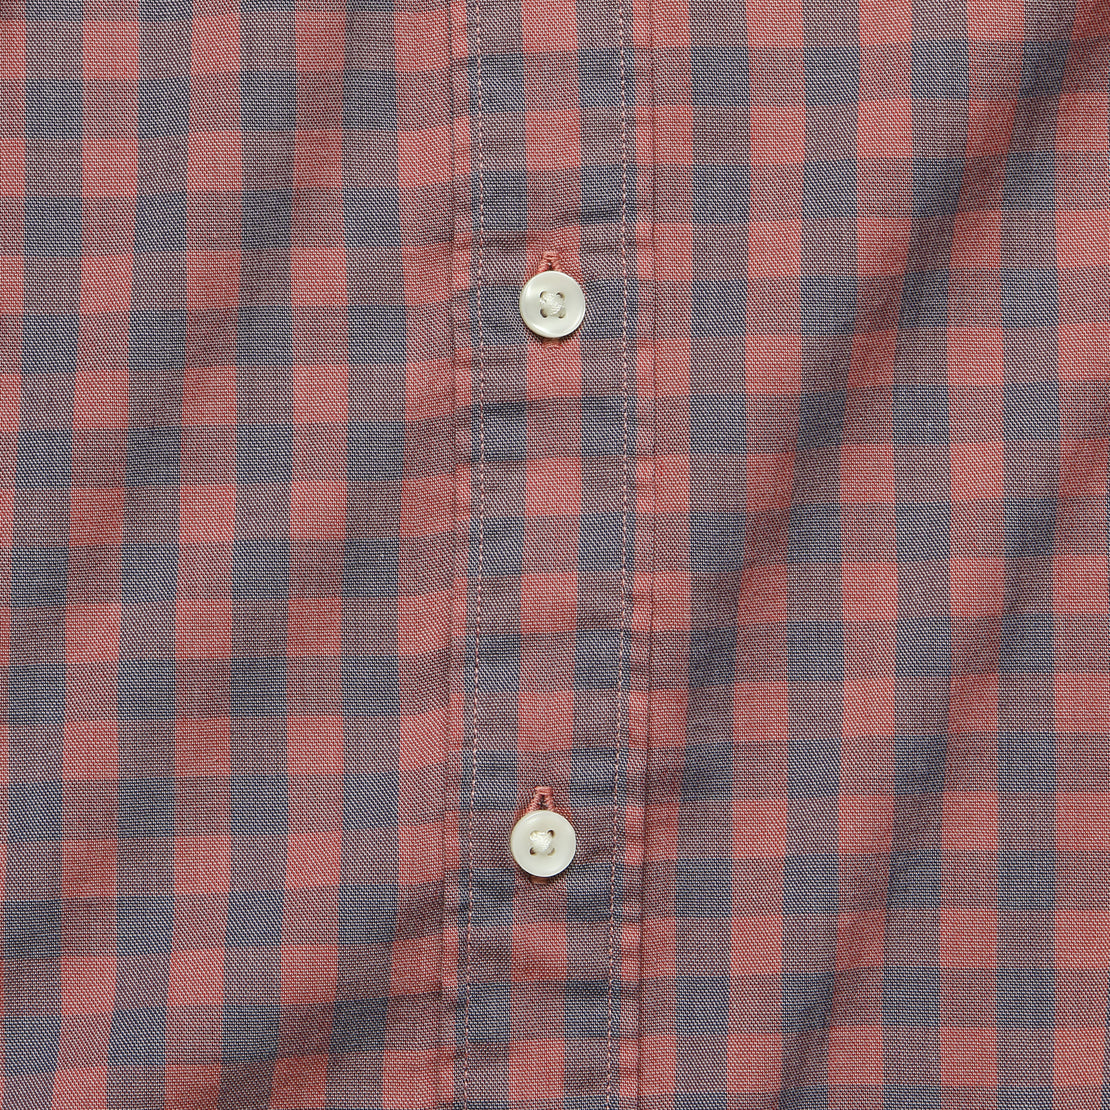 Movement Shirt - Barn Red Gingham - Faherty - STAG Provisions - Tops - L/S Woven - Plaid